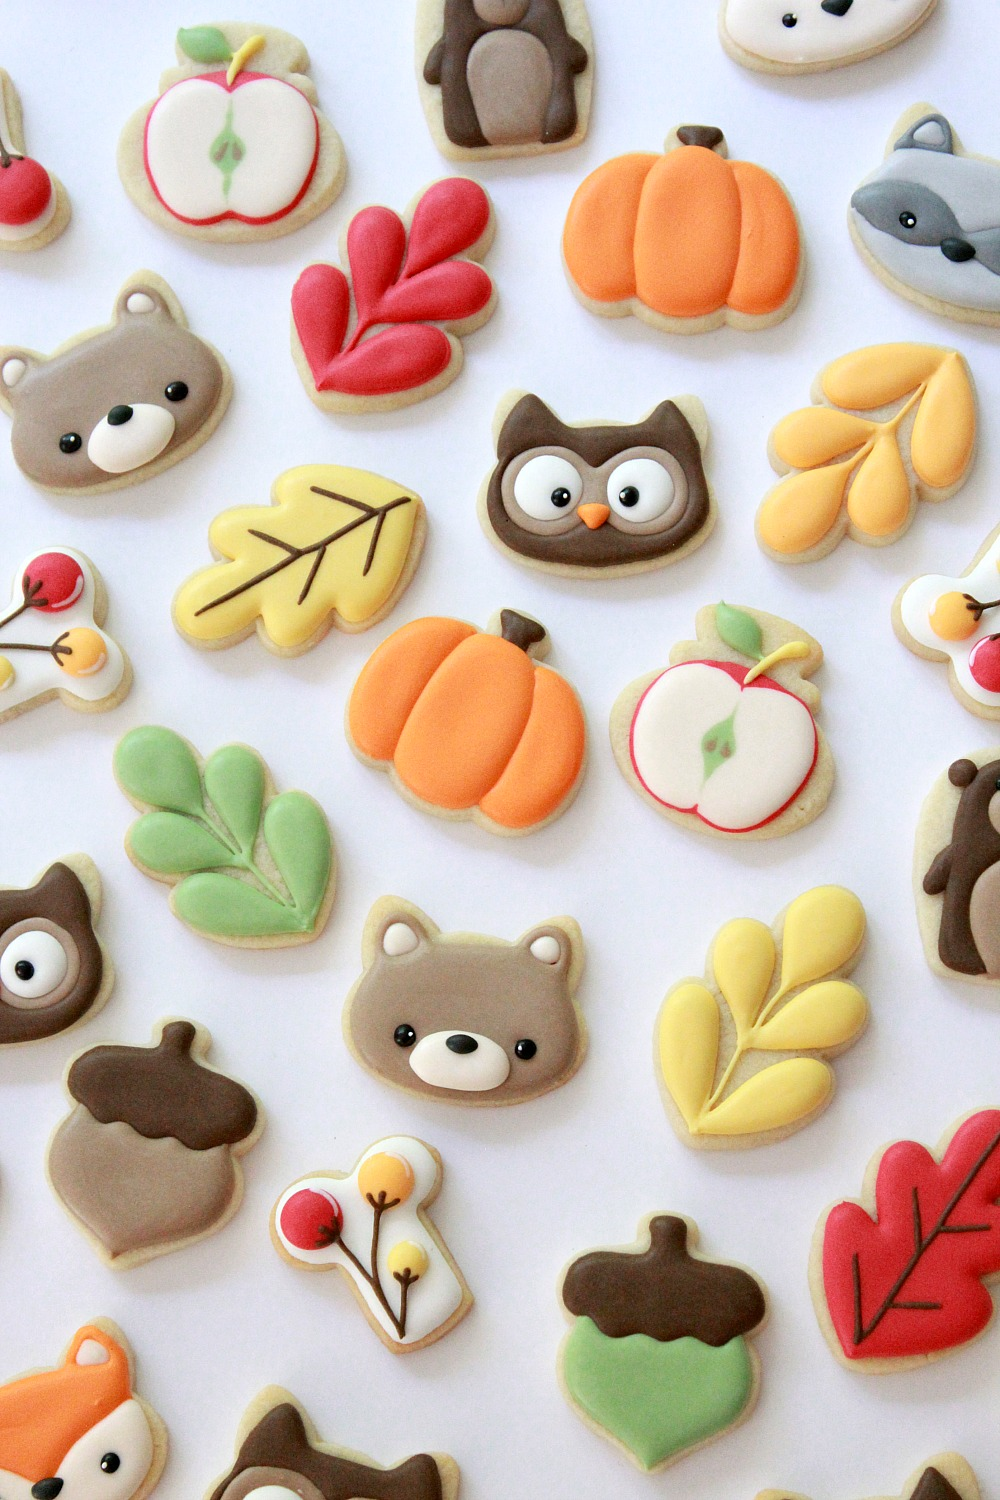 Top 7 Tips for Decorating Mini Cookies with Royal Icing -   21 cute holiday Cookies ideas